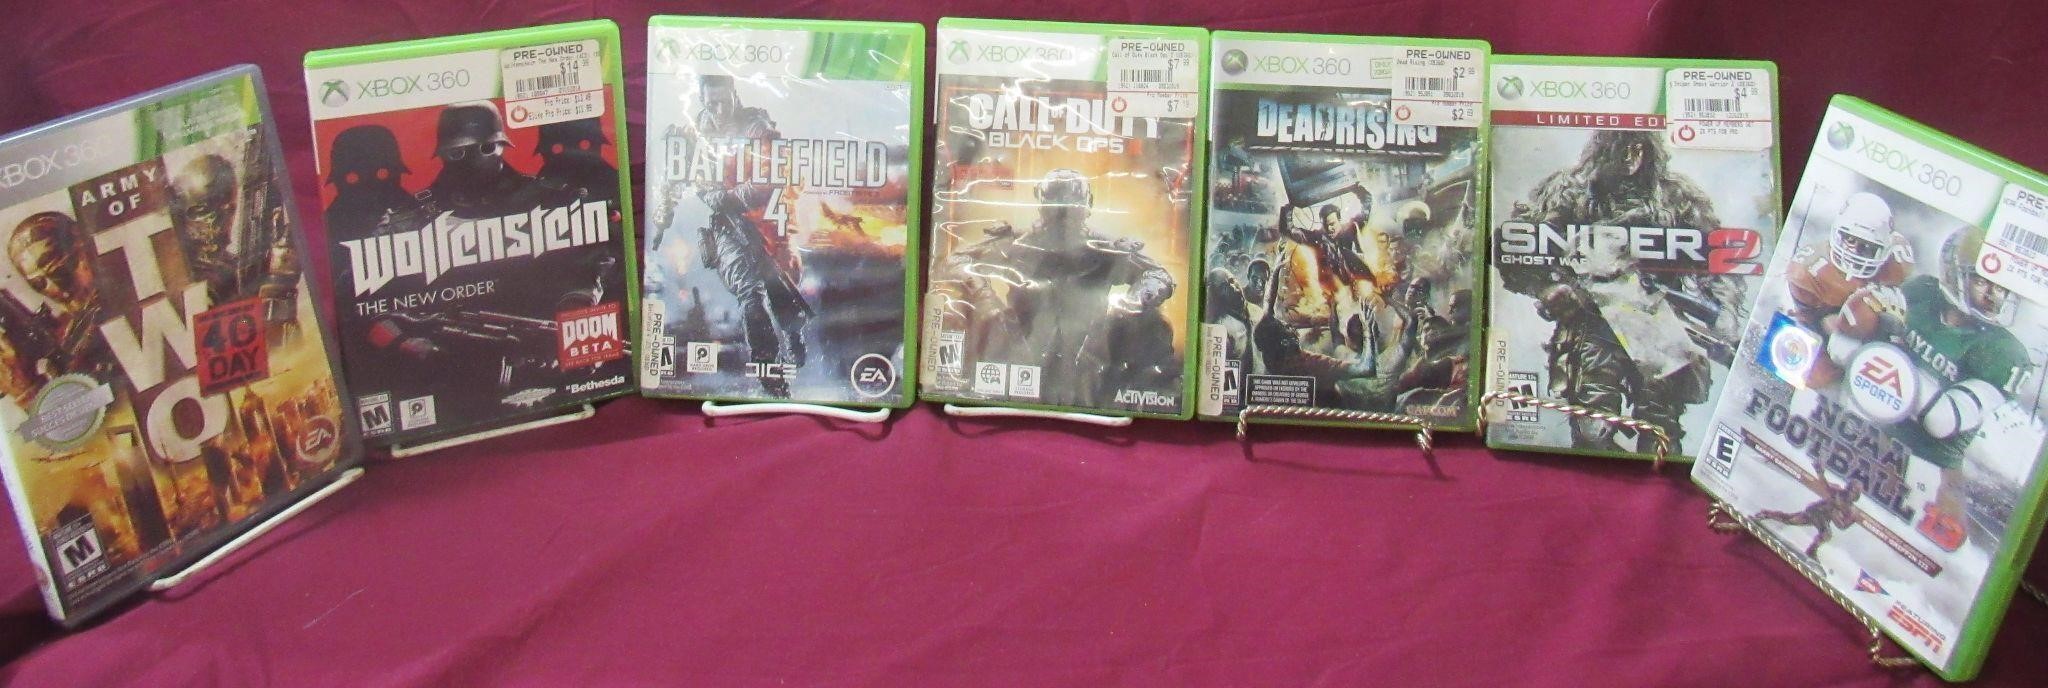 LOT OF (7) XBOX 360 GAMES